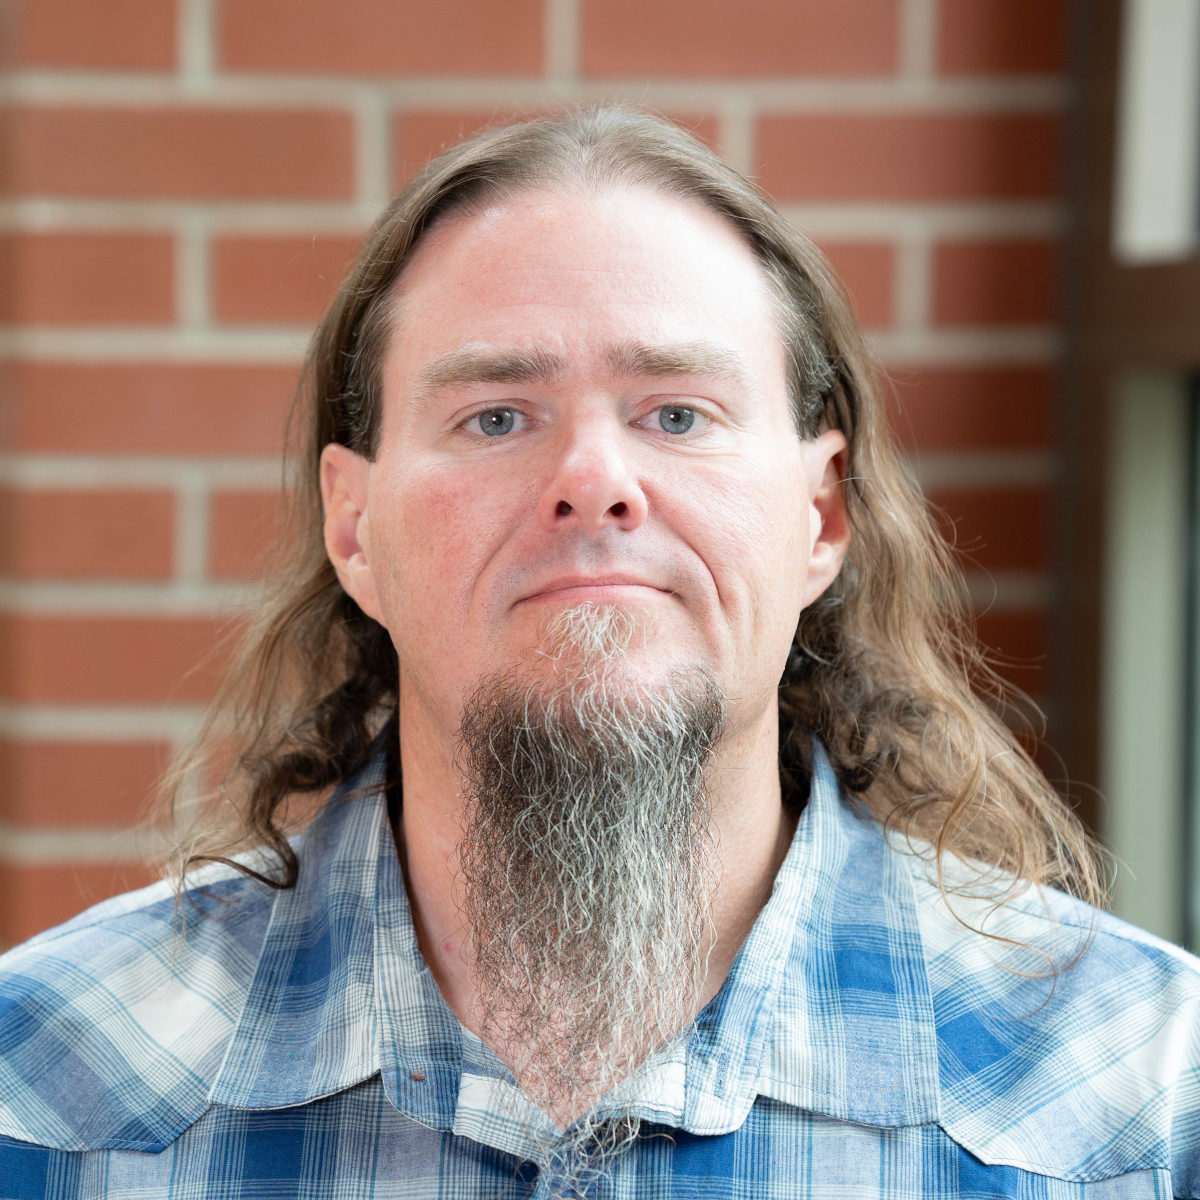 With long hair and a long beard, Dale looks at the camera for a photo.